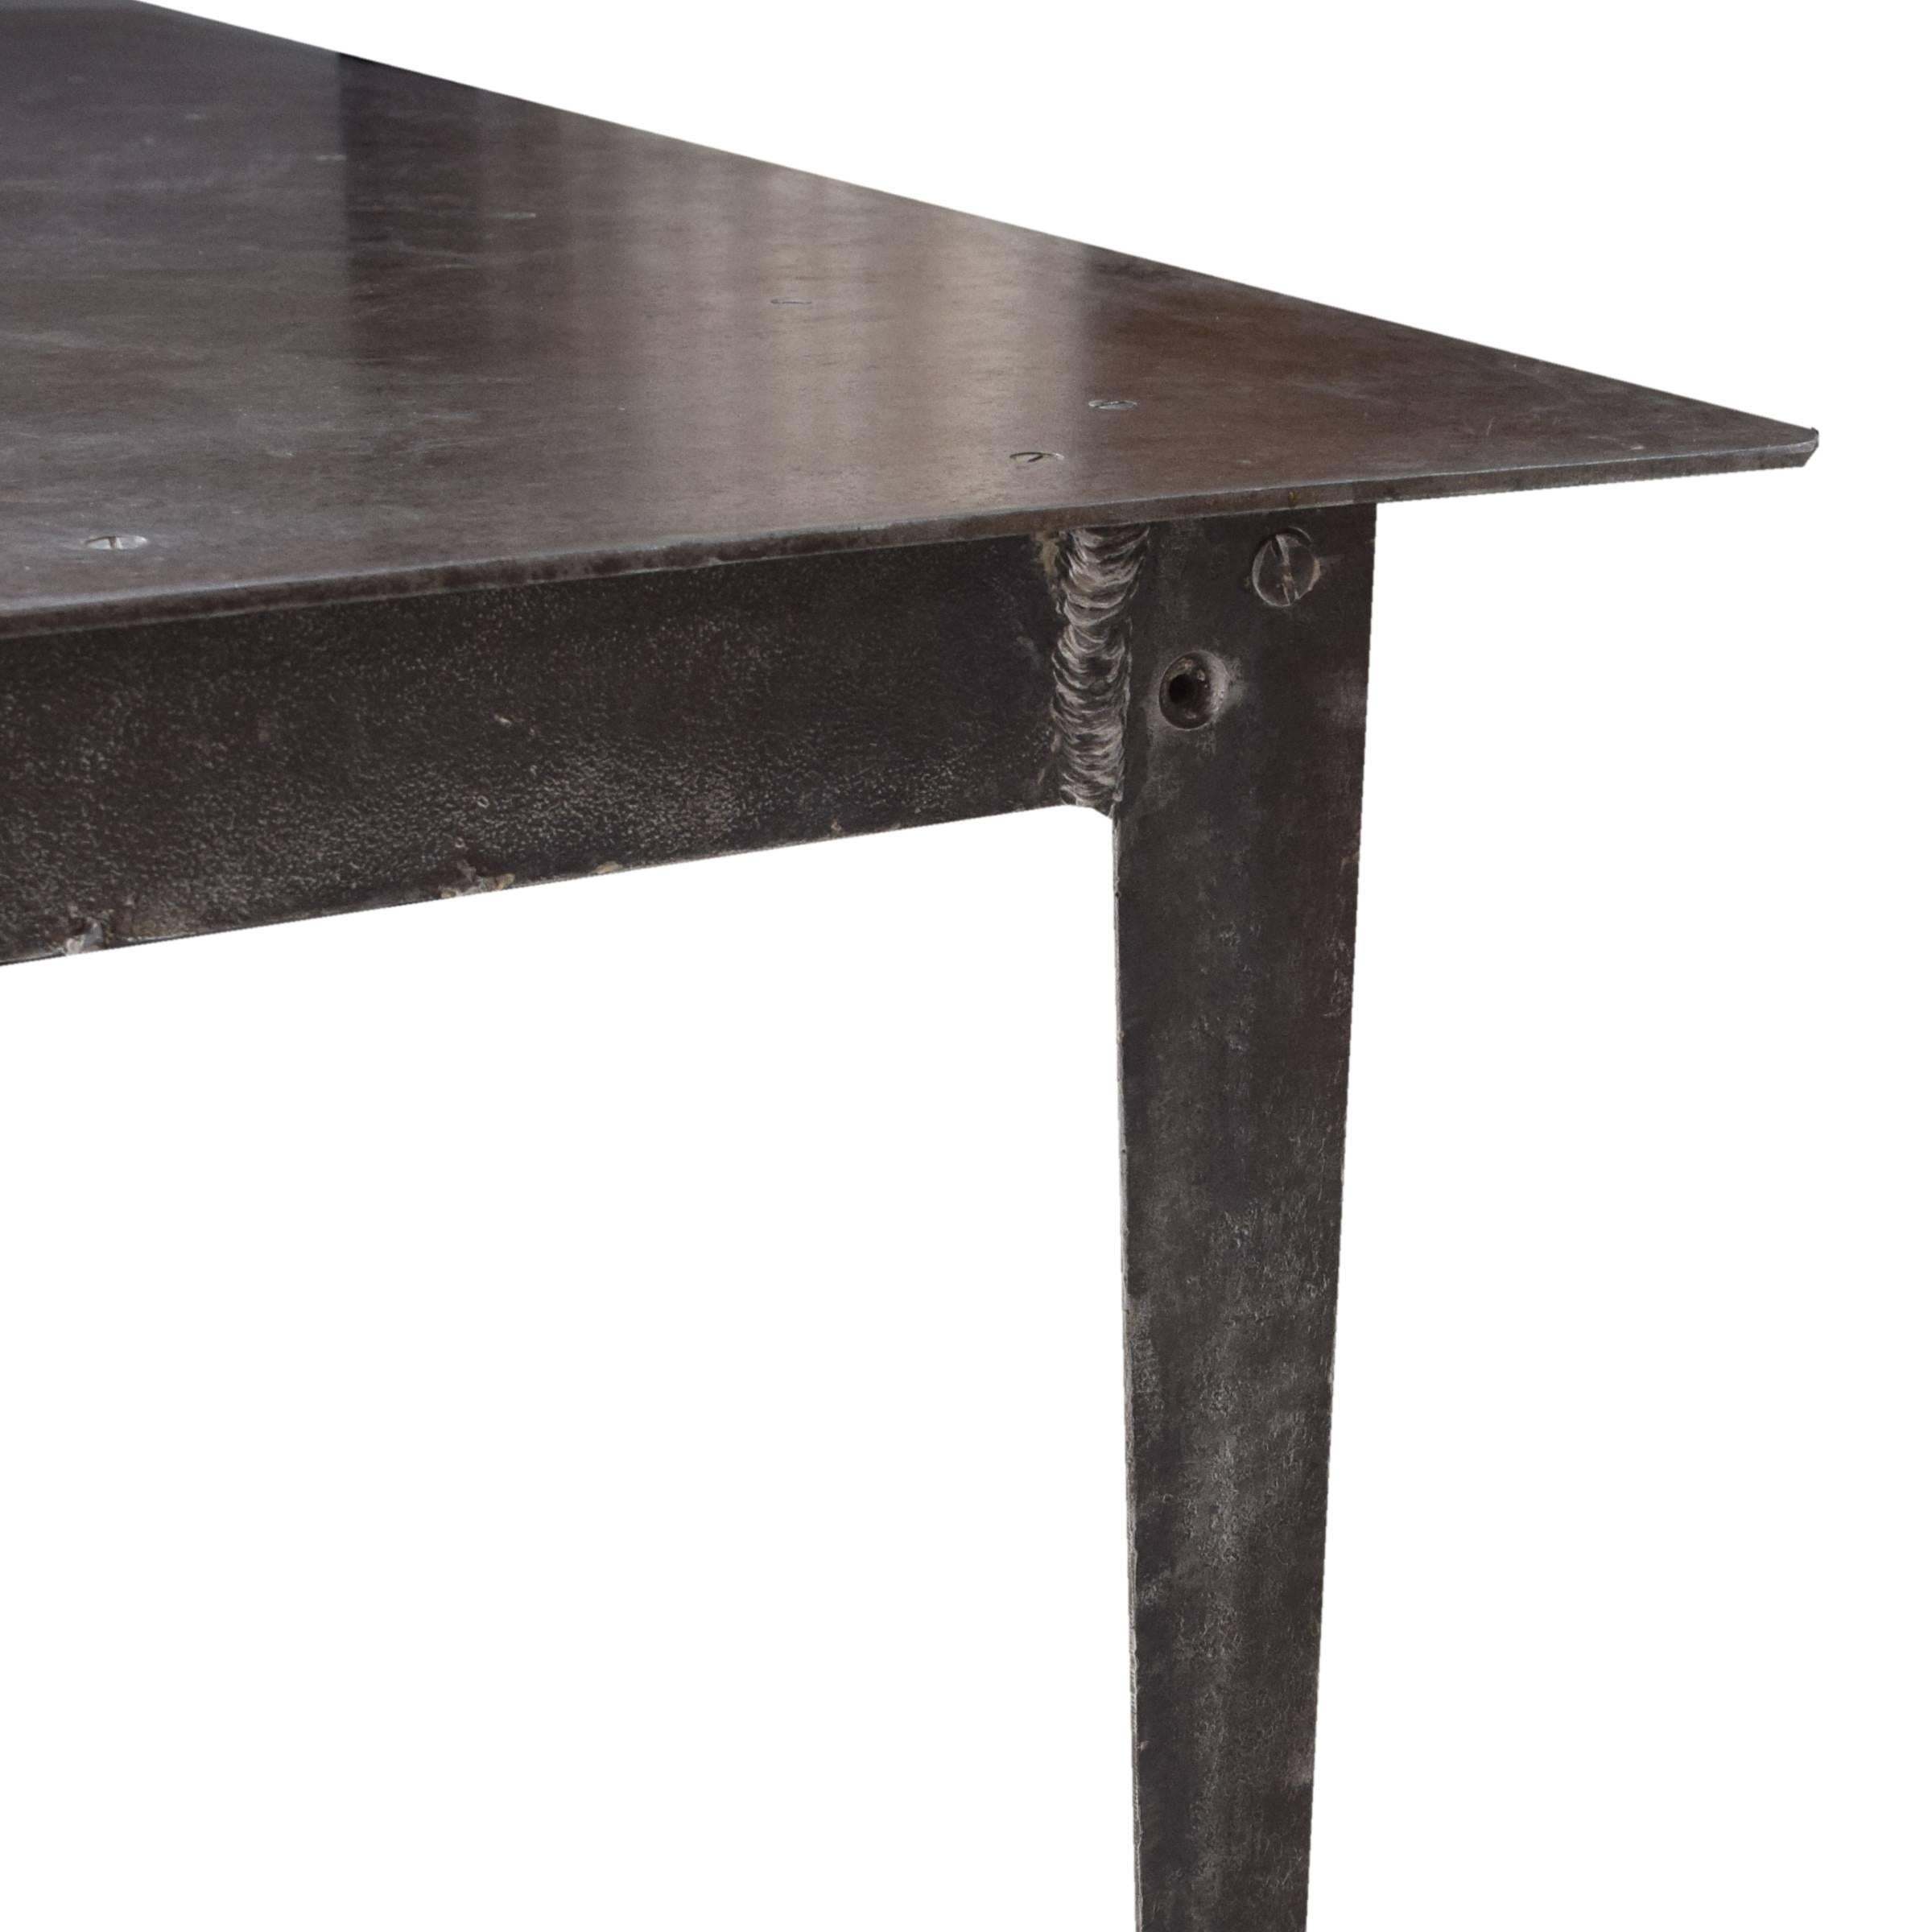 20th Century American Iron Table from the Premier Candy Co.